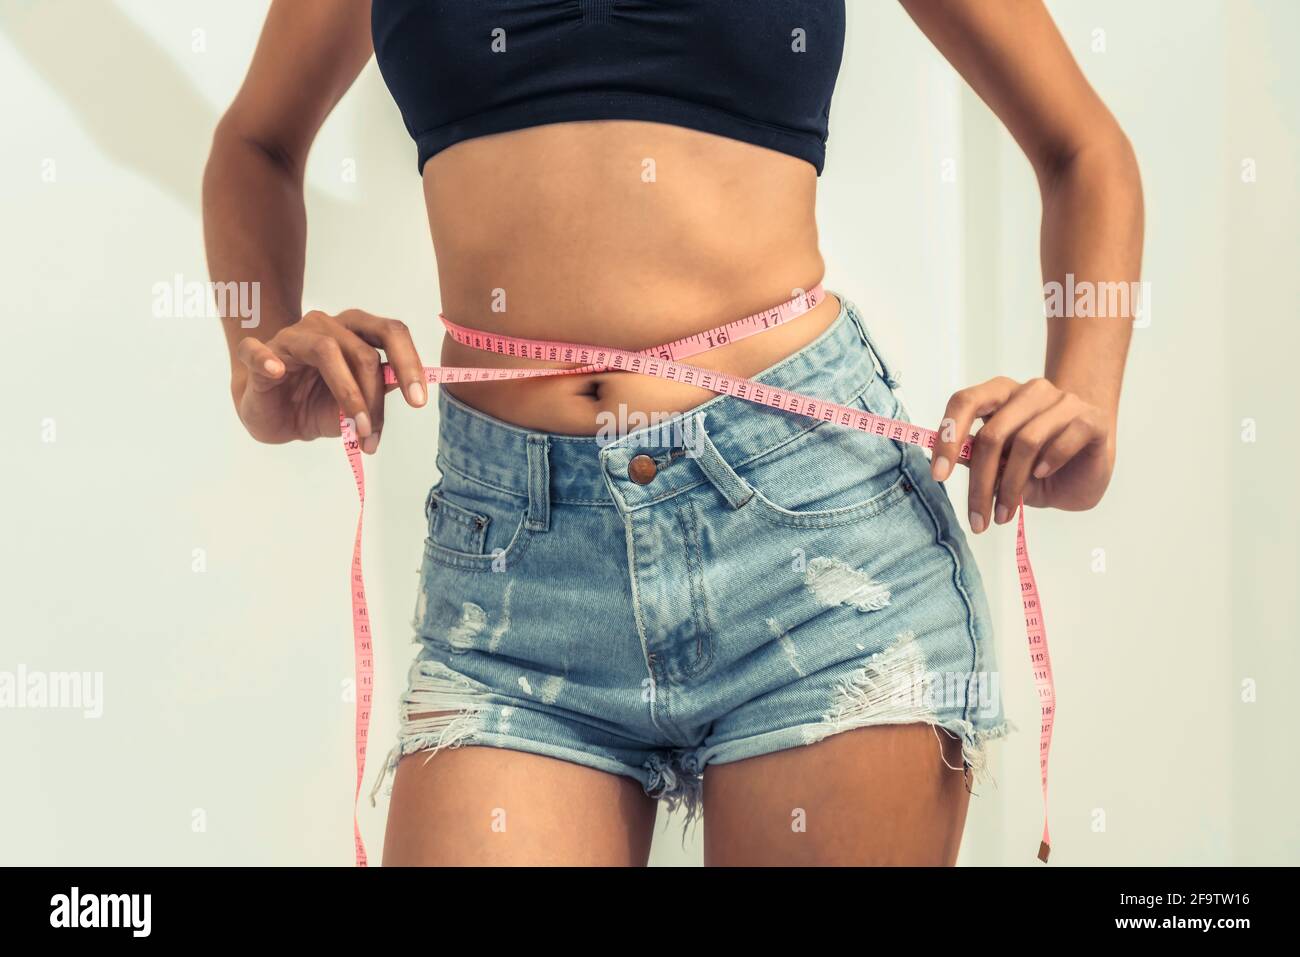 https://c8.alamy.com/comp/2F9TW16/young-slim-woman-measures-her-waist-by-measuring-tape-after-diet-against-white-backgrounds-concept-of-weight-loss-success-2F9TW16.jpg